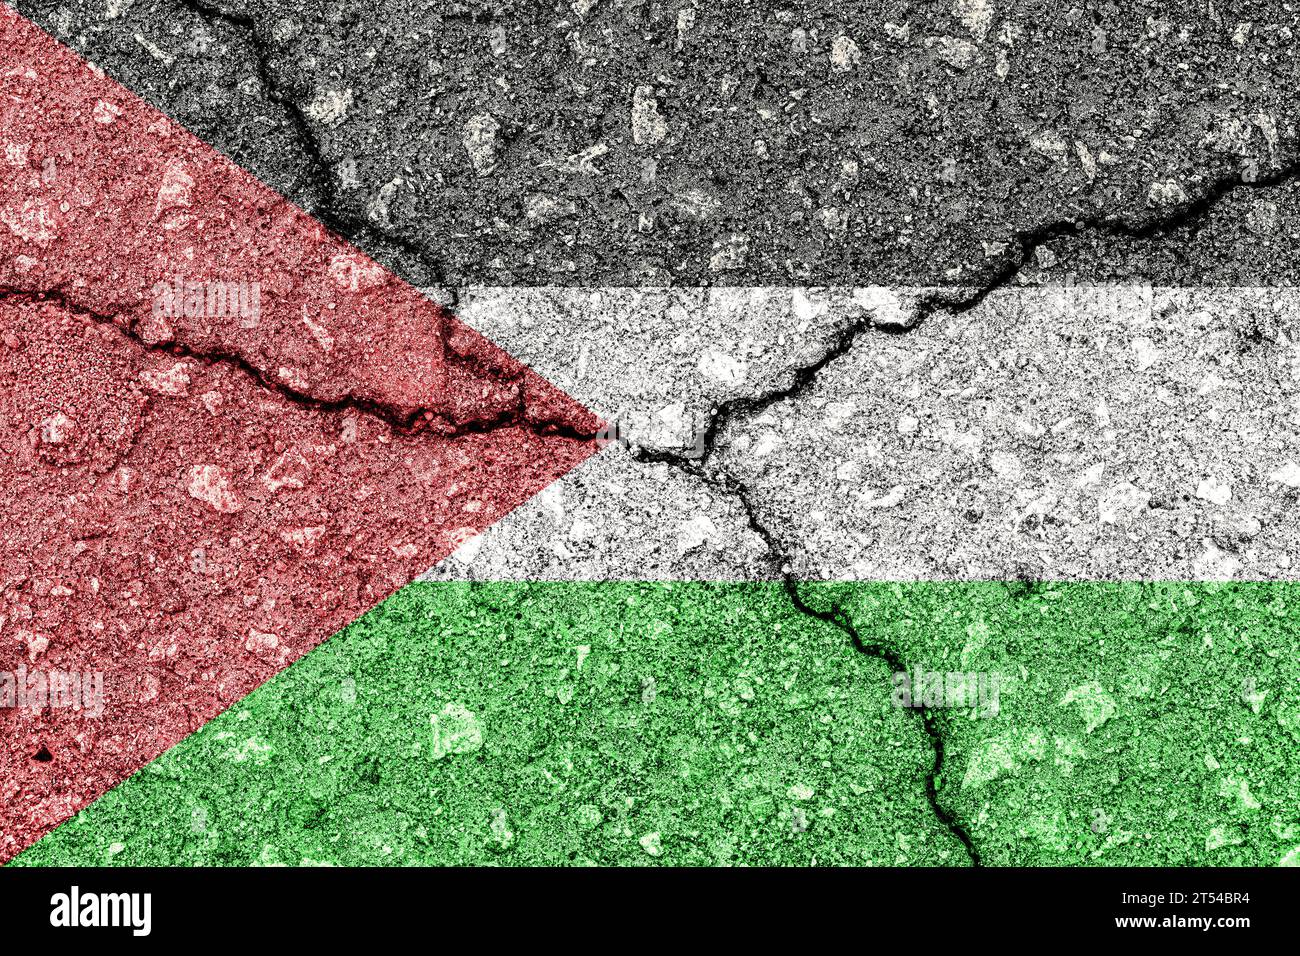 Palestine flag on cracked concrete wall. The concept of crisis, war, conflict, terrorism or other problems in the country. Abstract disaster symbol. Stock Photo